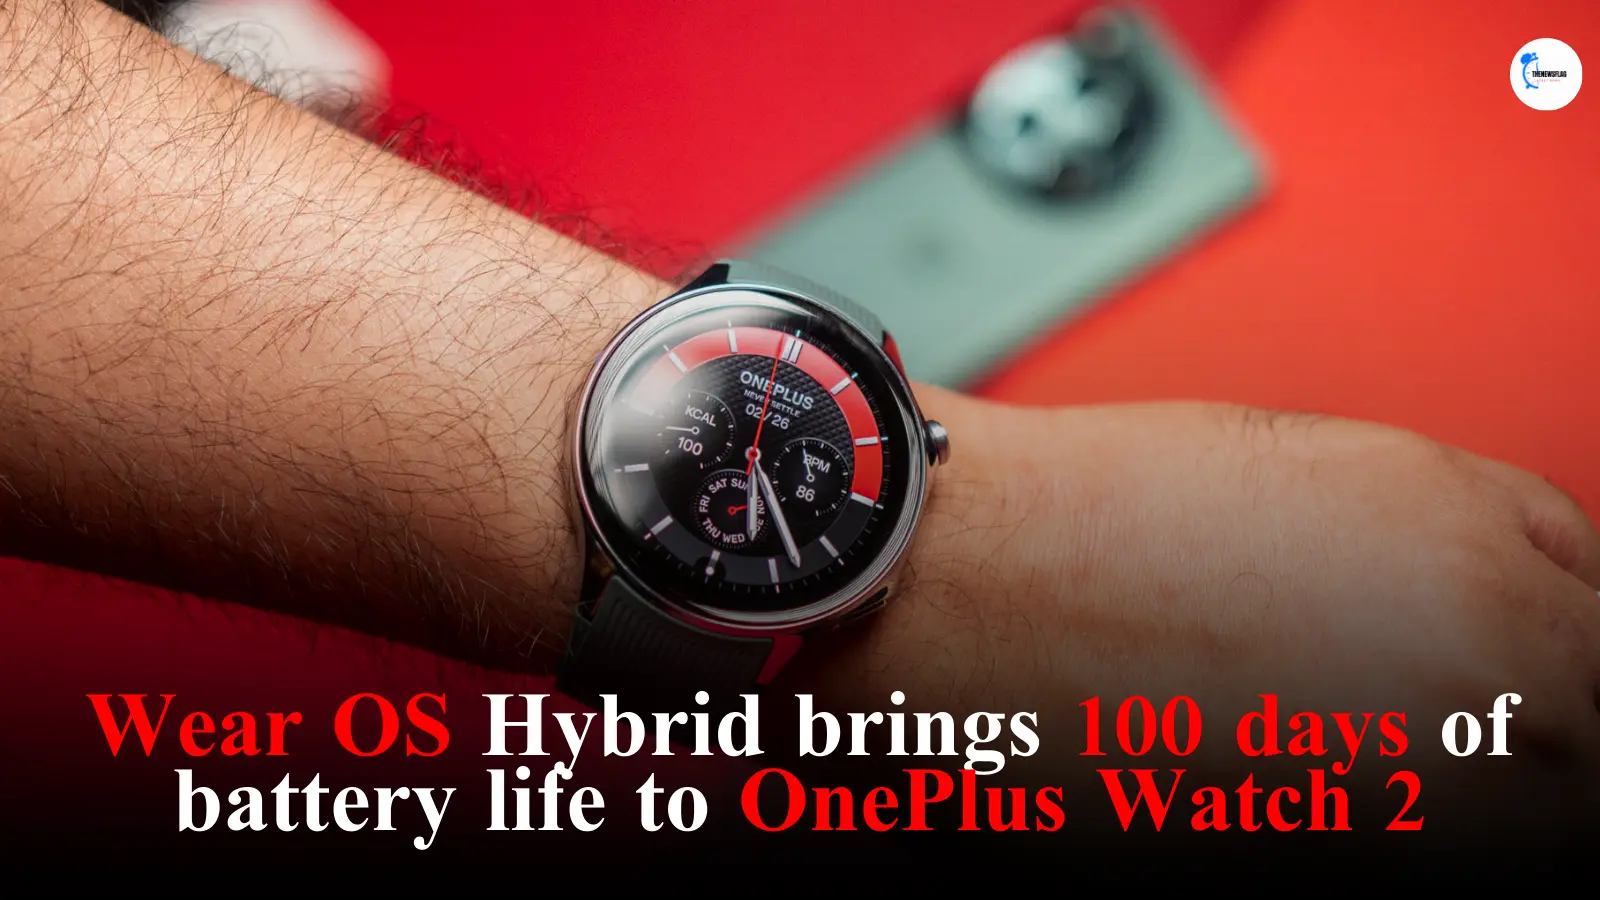 Wear OS Hybrid brings 100 days battery life to OnePlus Watch 2